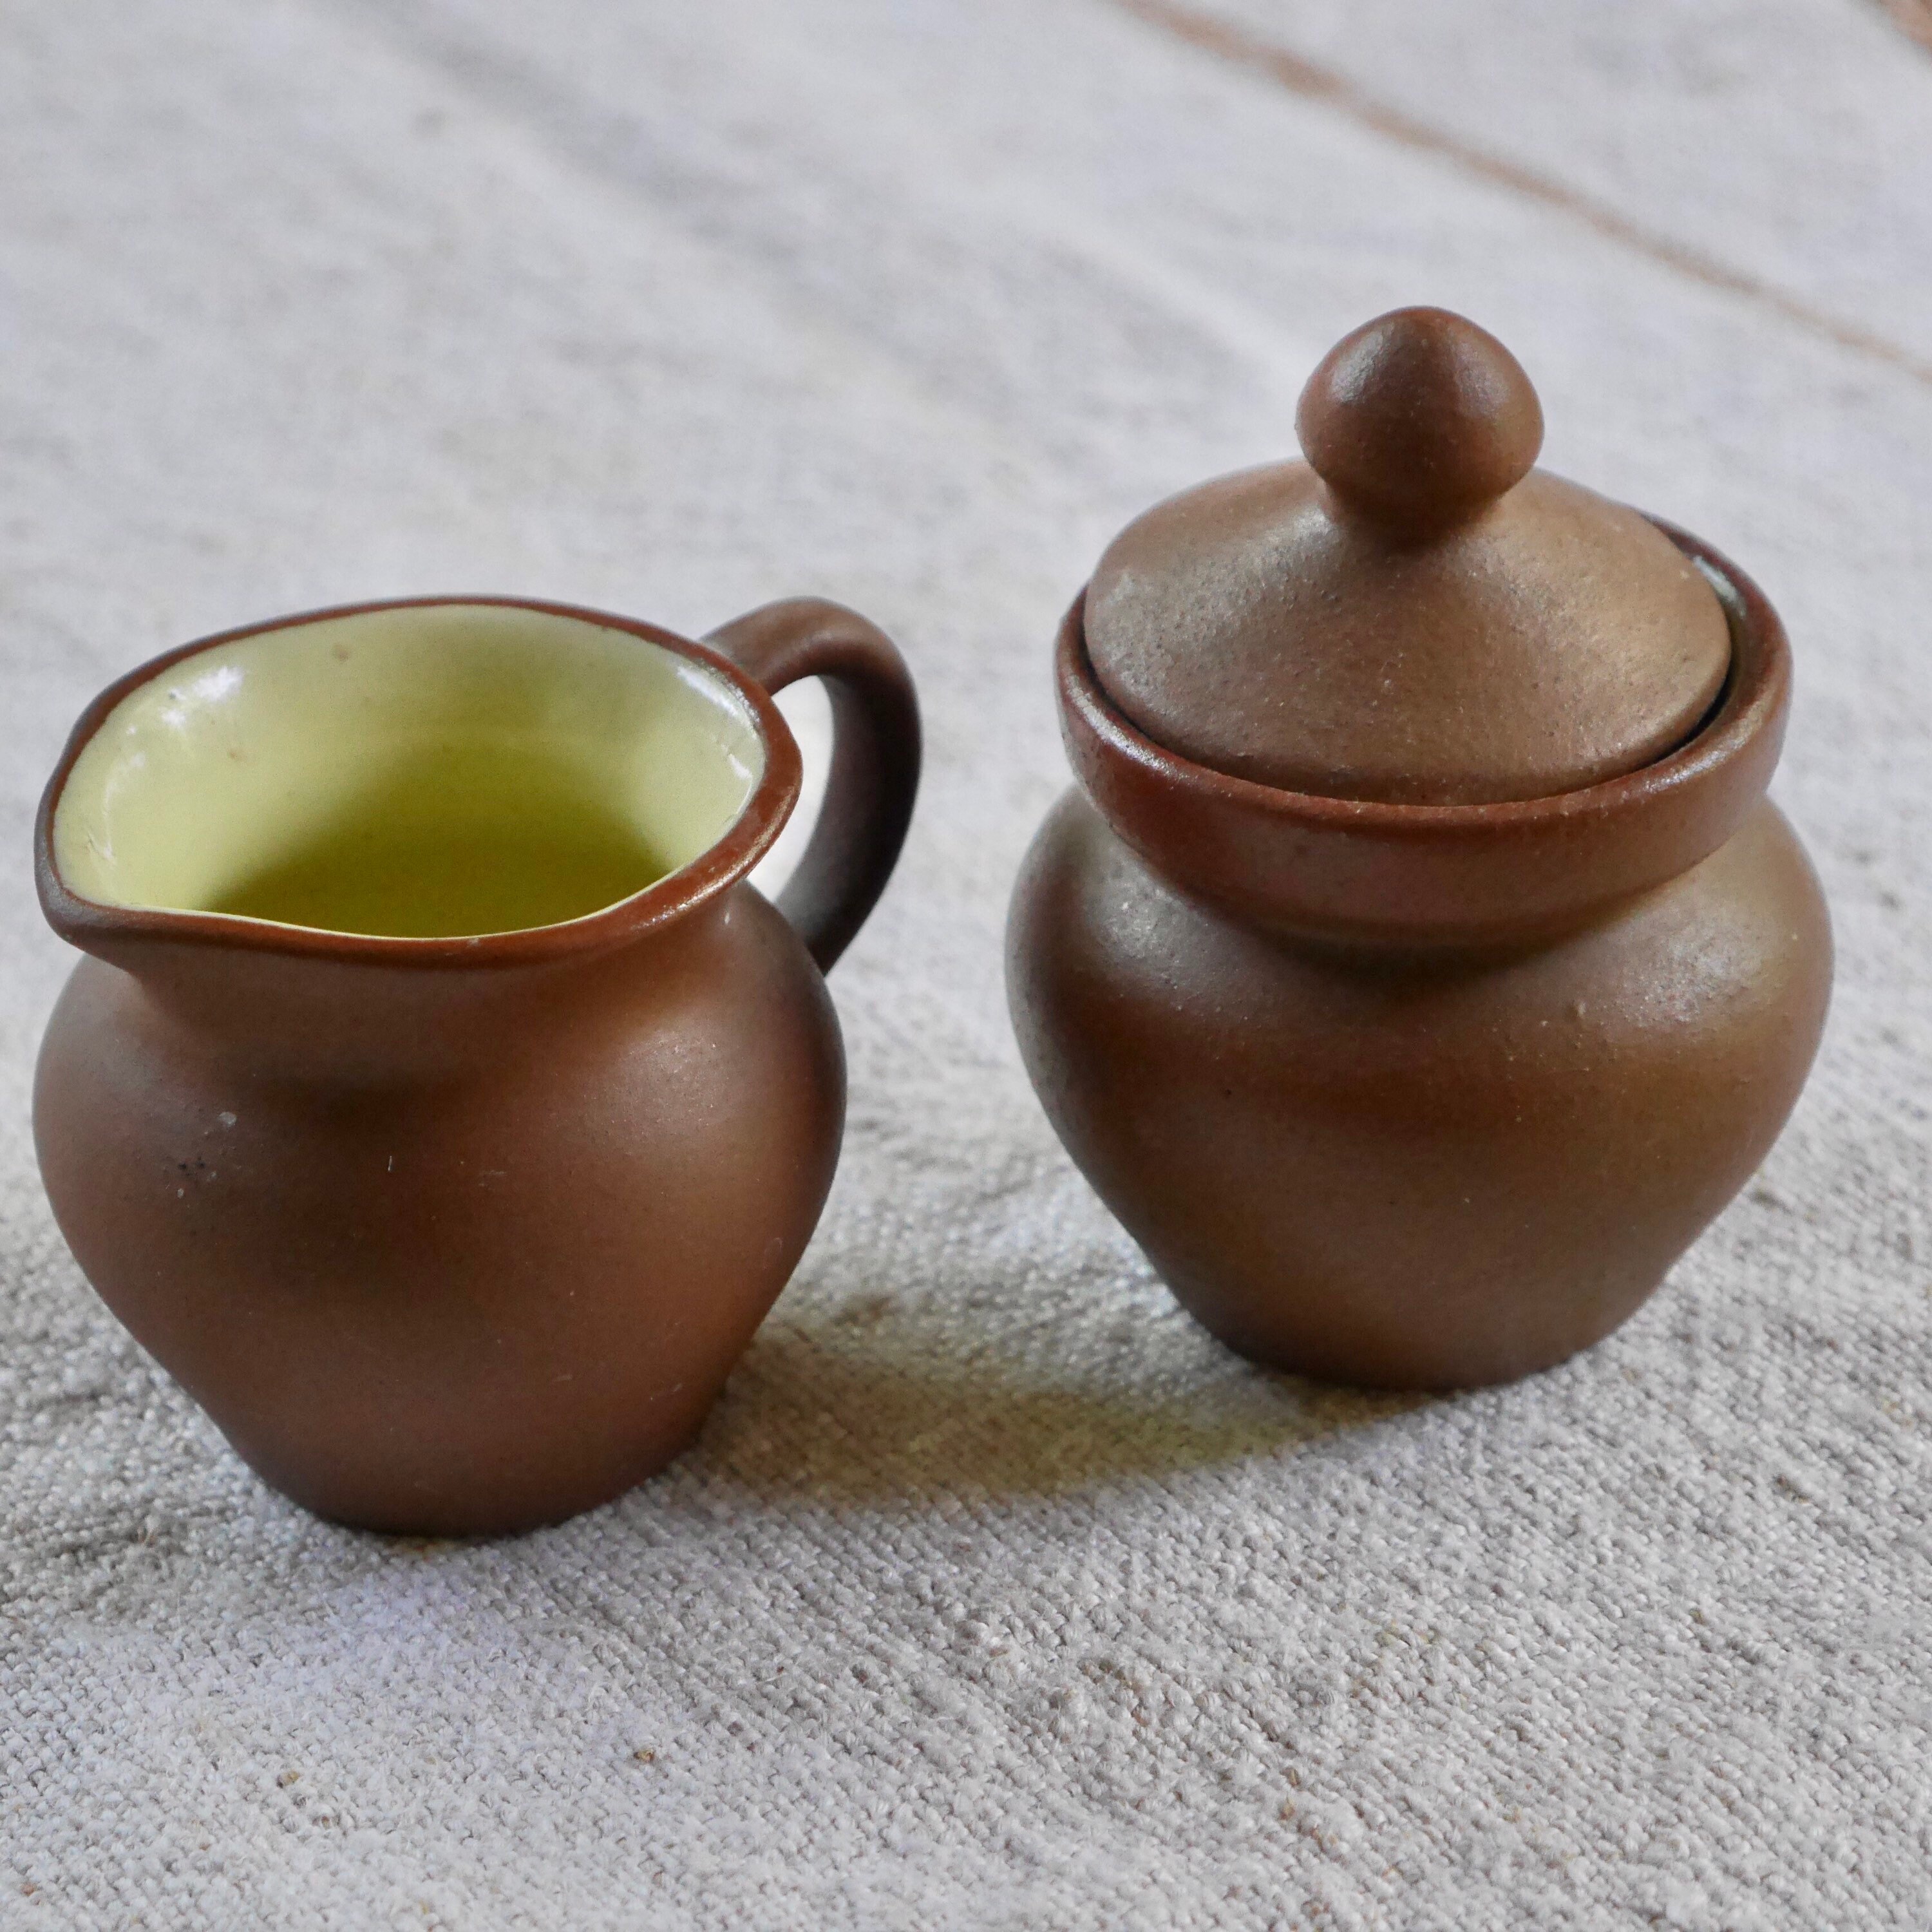 Small Ceramic Creamer Tea Coffee Pitcher: with Lid Creamer Pitcher